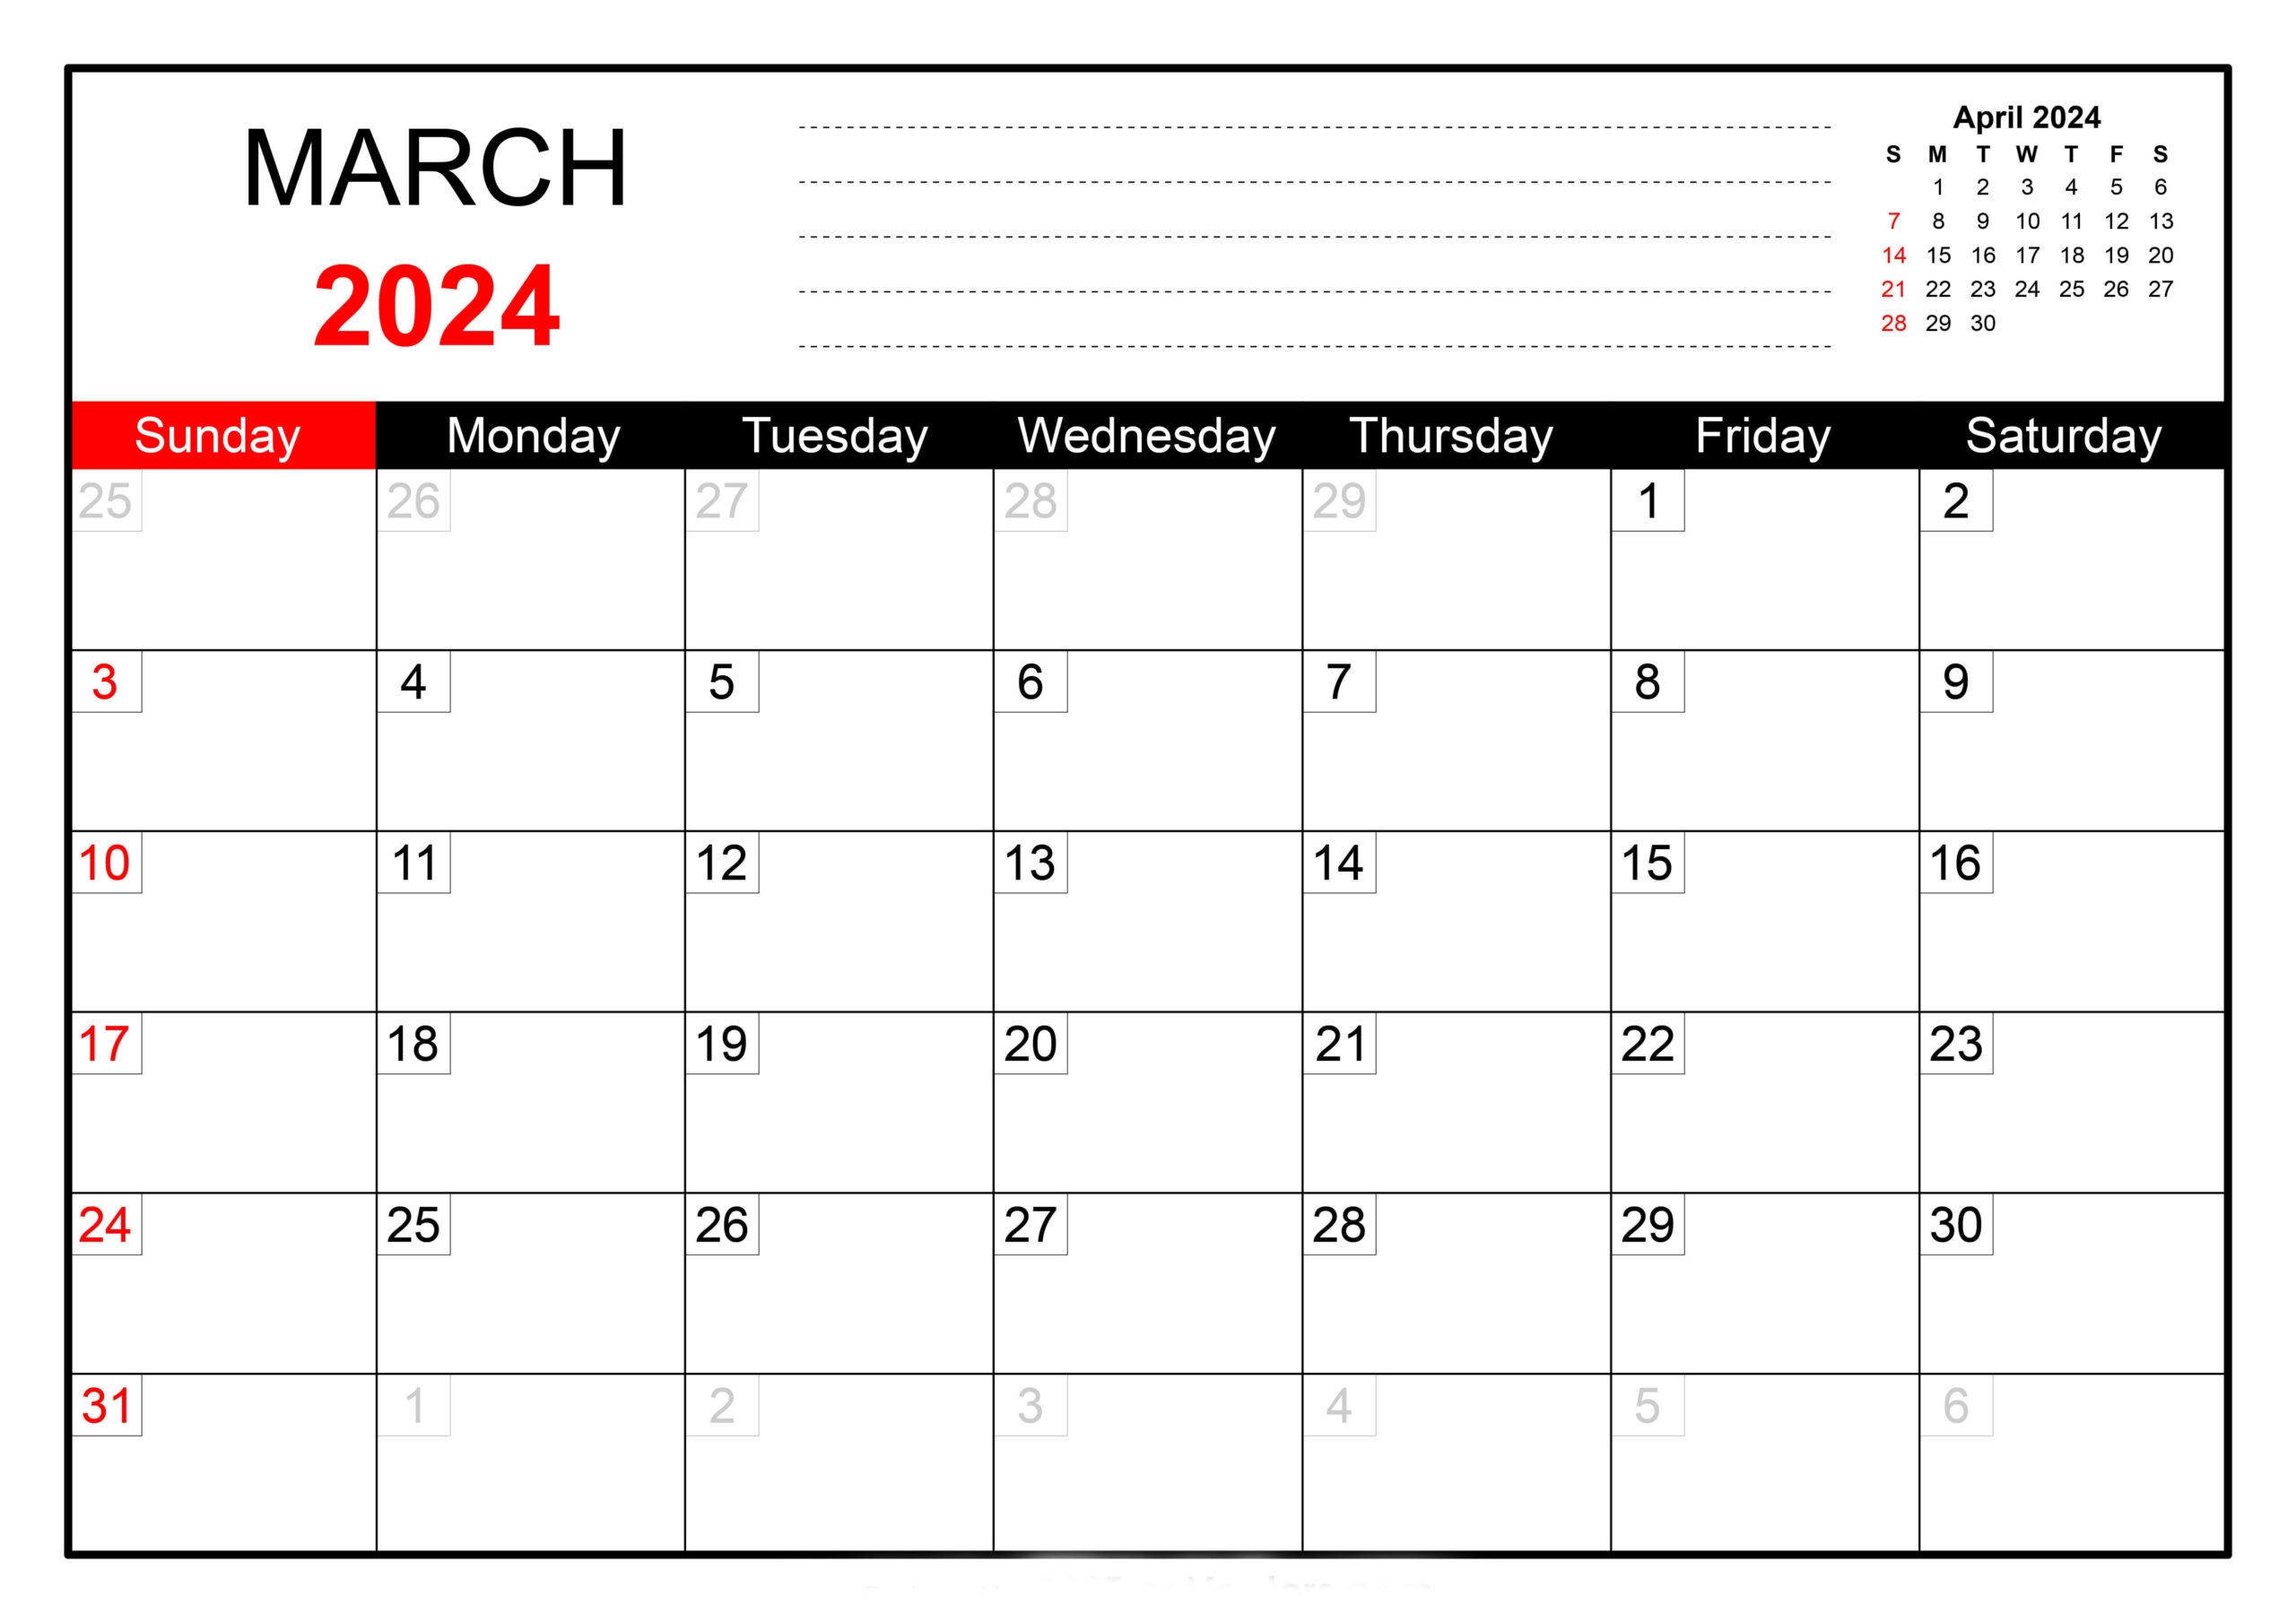 March Printable Calendar 2024 pertaining to Free Printable Calendar 2024 With Time Slots